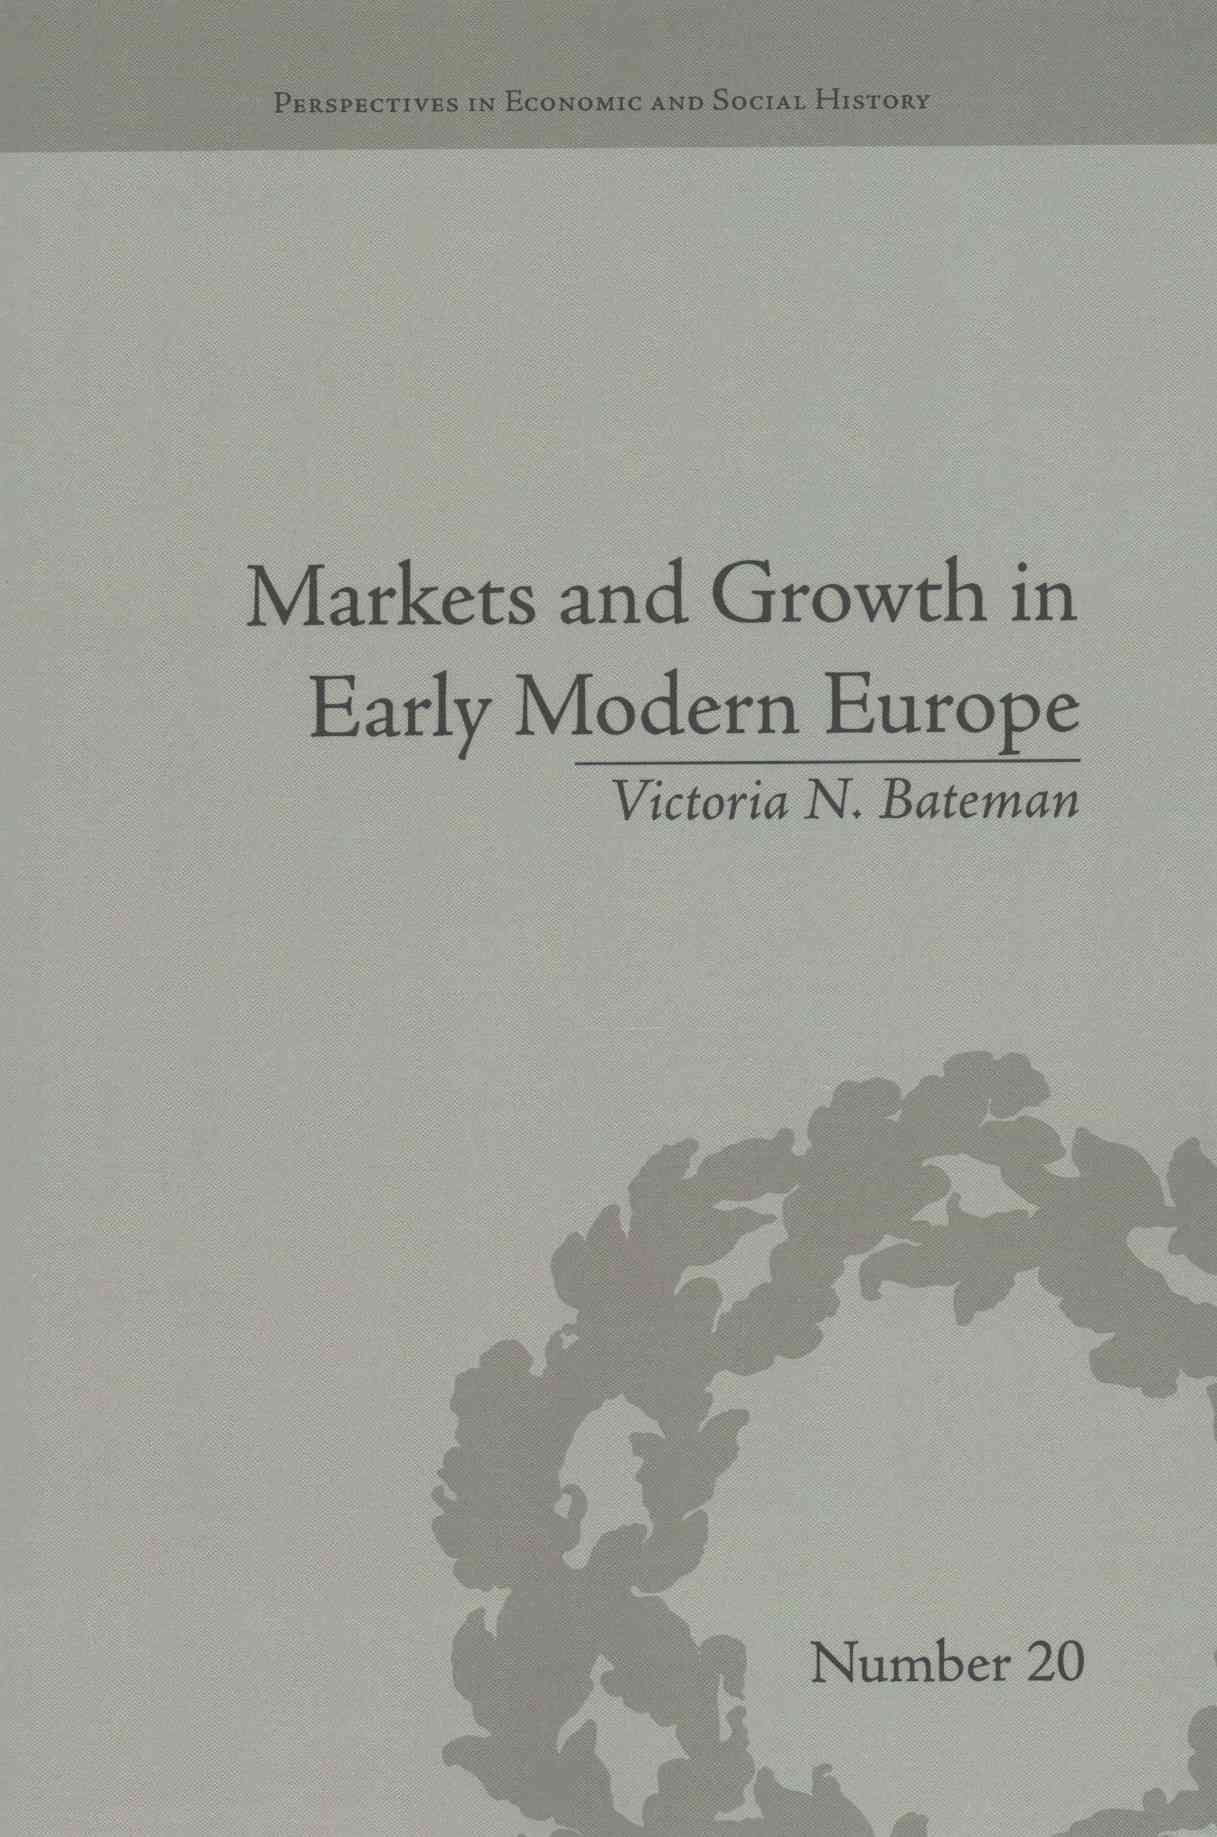 Markets and Growth in Early Modern Europe